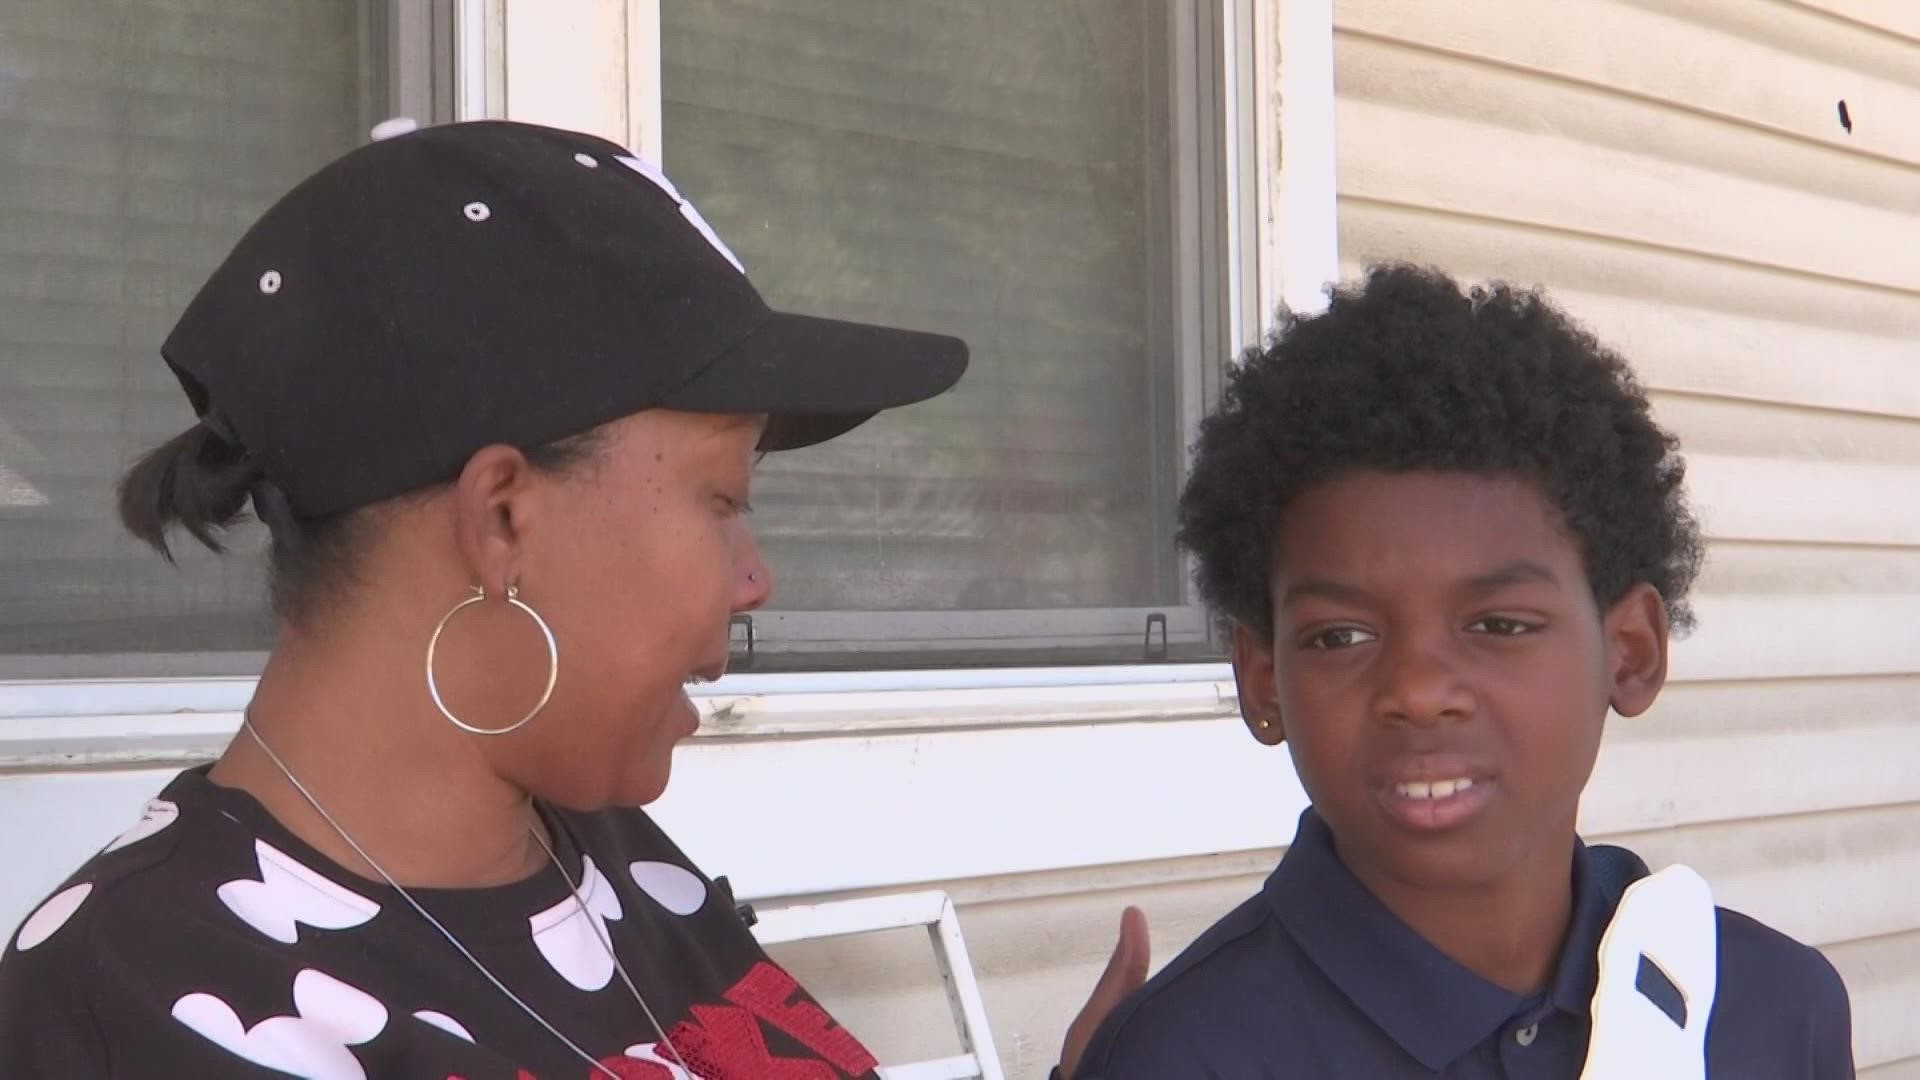 The mother of the 10-year-old boy injured in the shooting said their home was hit with at least 30 bullets early Saturday morning.